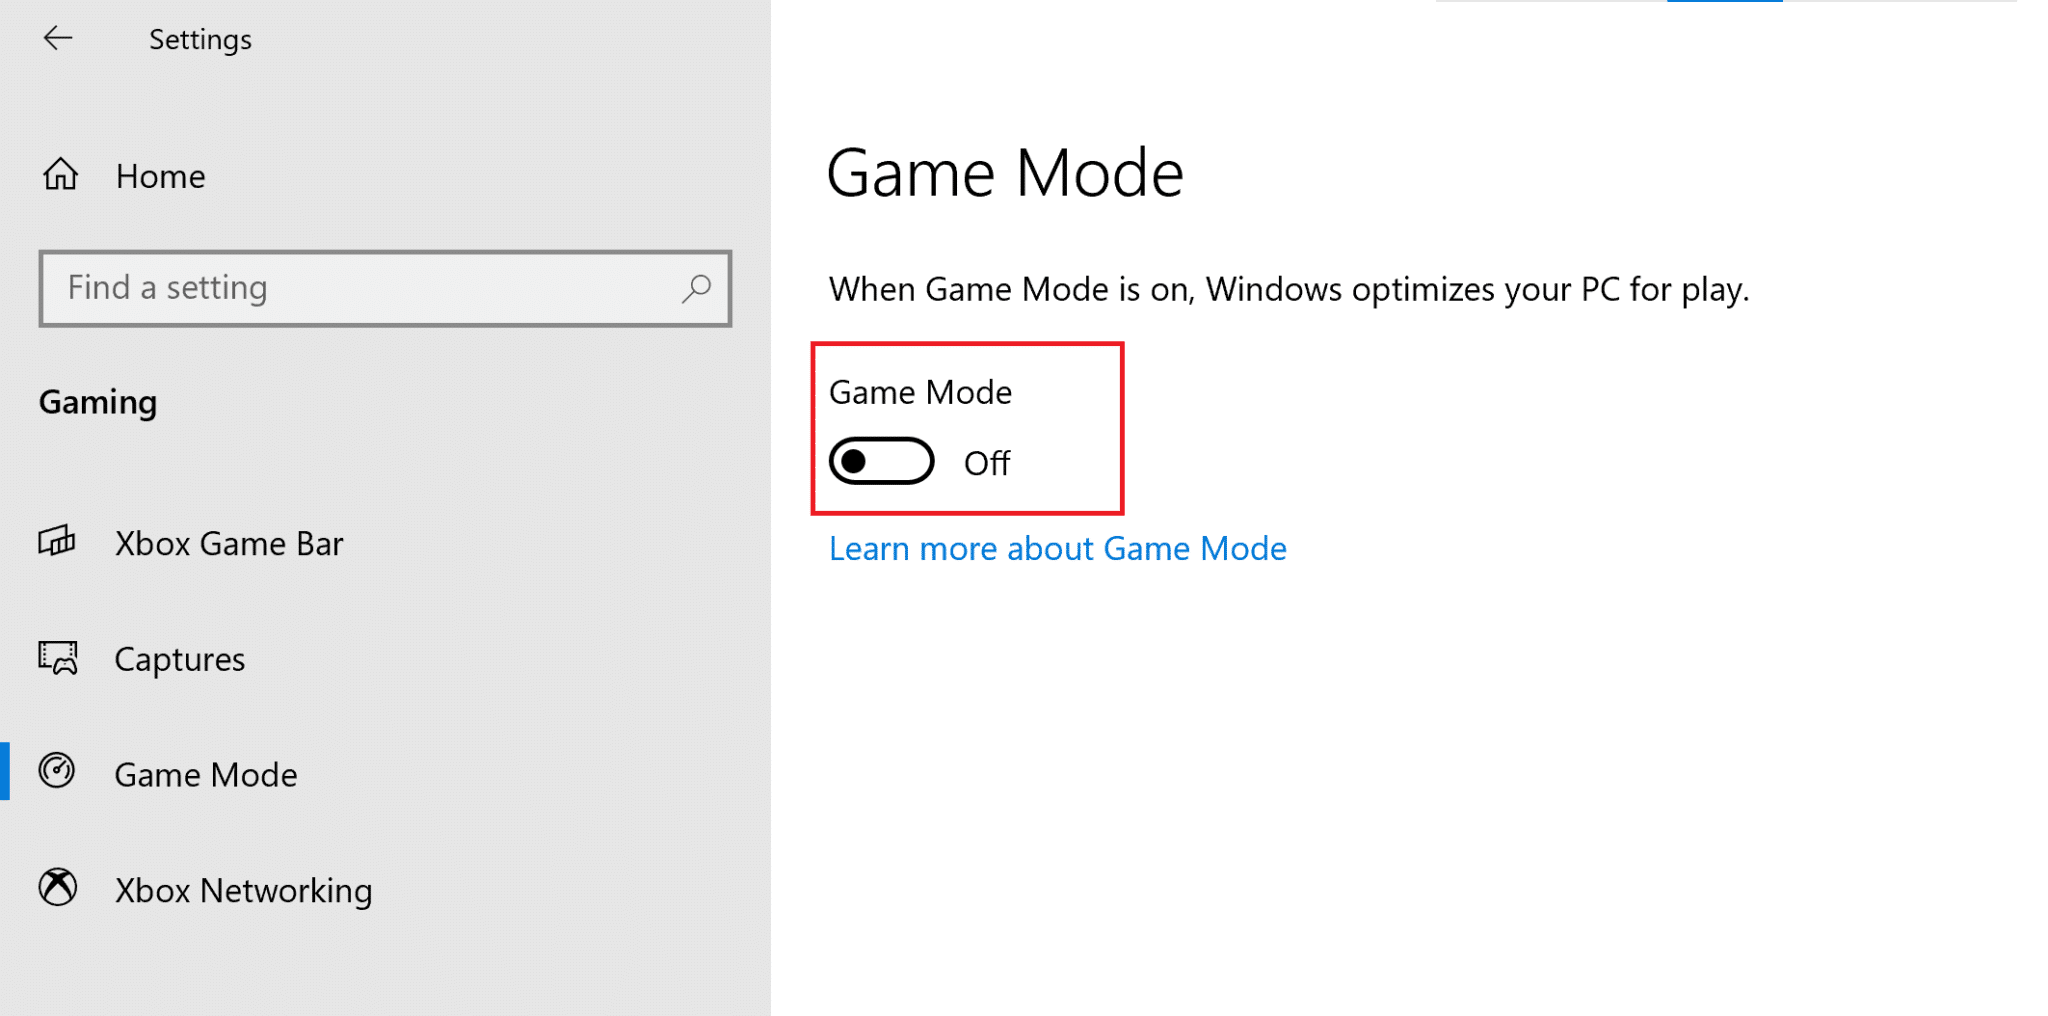 Toggle the Game Mode off and launch the game